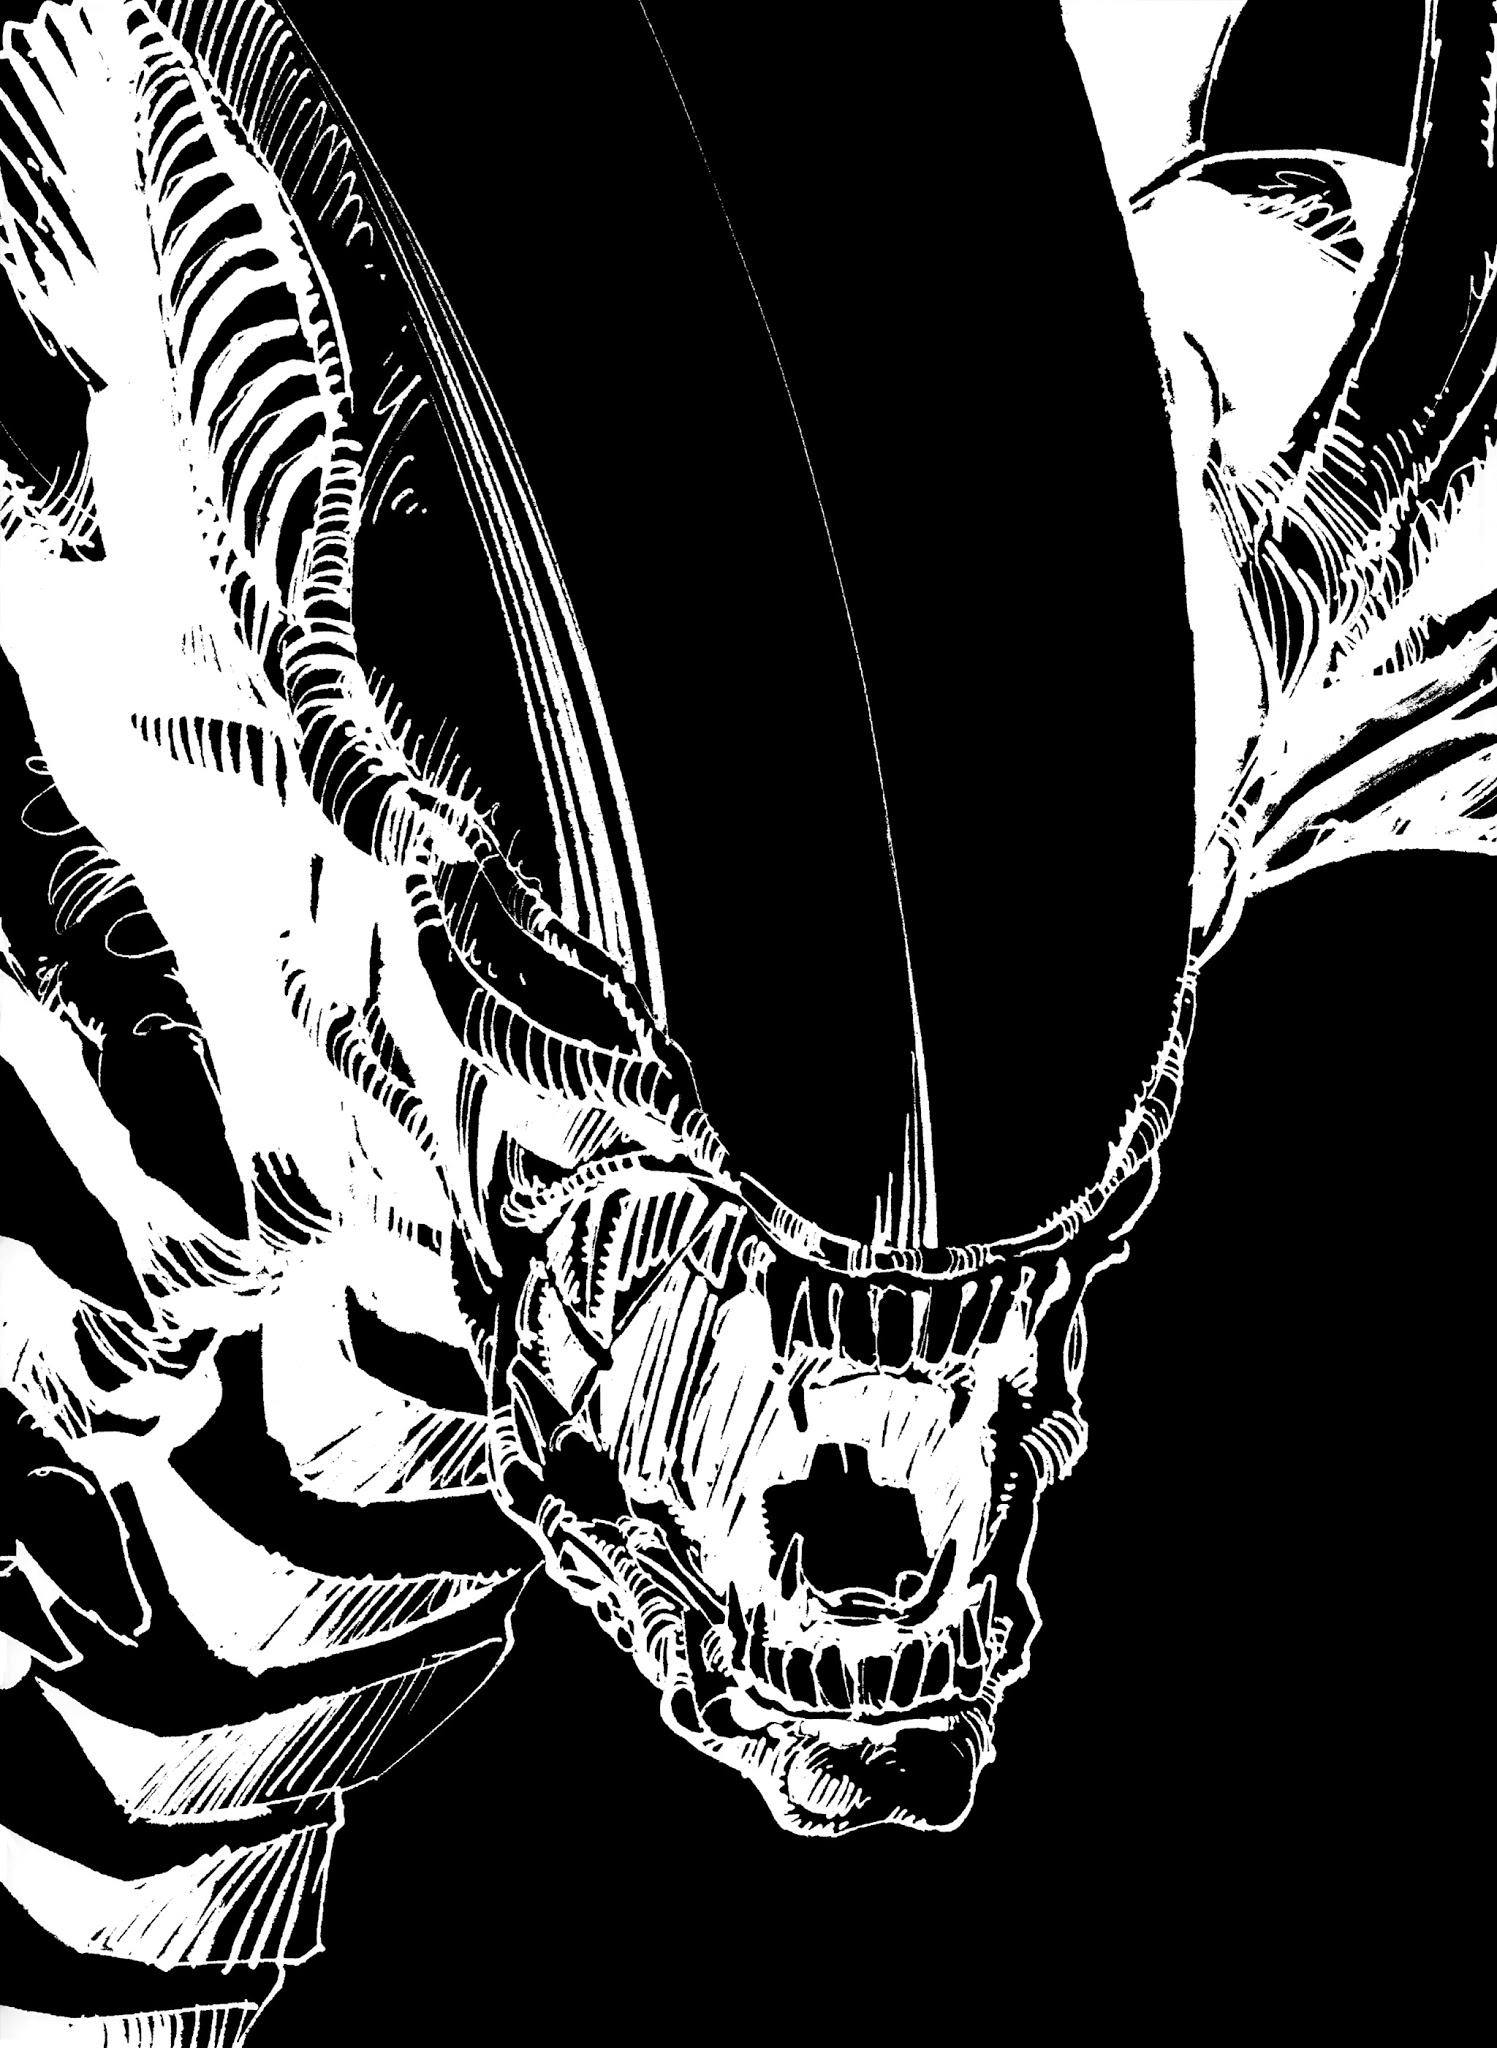 Read online Alien: The Illustrated Story comic -  Issue # TPB - 2